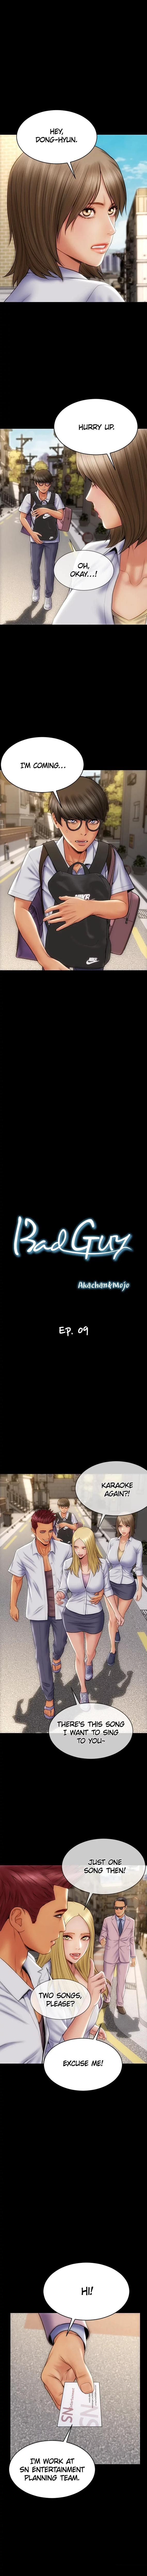 Bad Guy - Chapter 9 Page 1